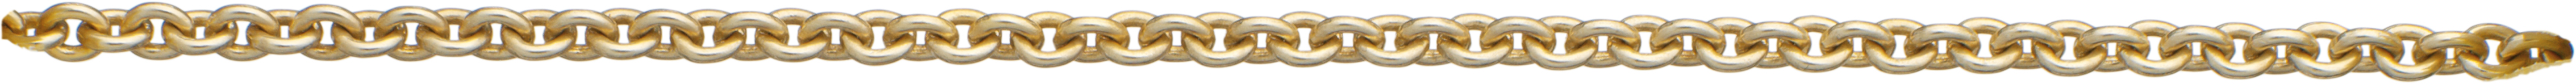 Anchor chain round gold 585/- 1.90mm, wire thickness 0.50mm